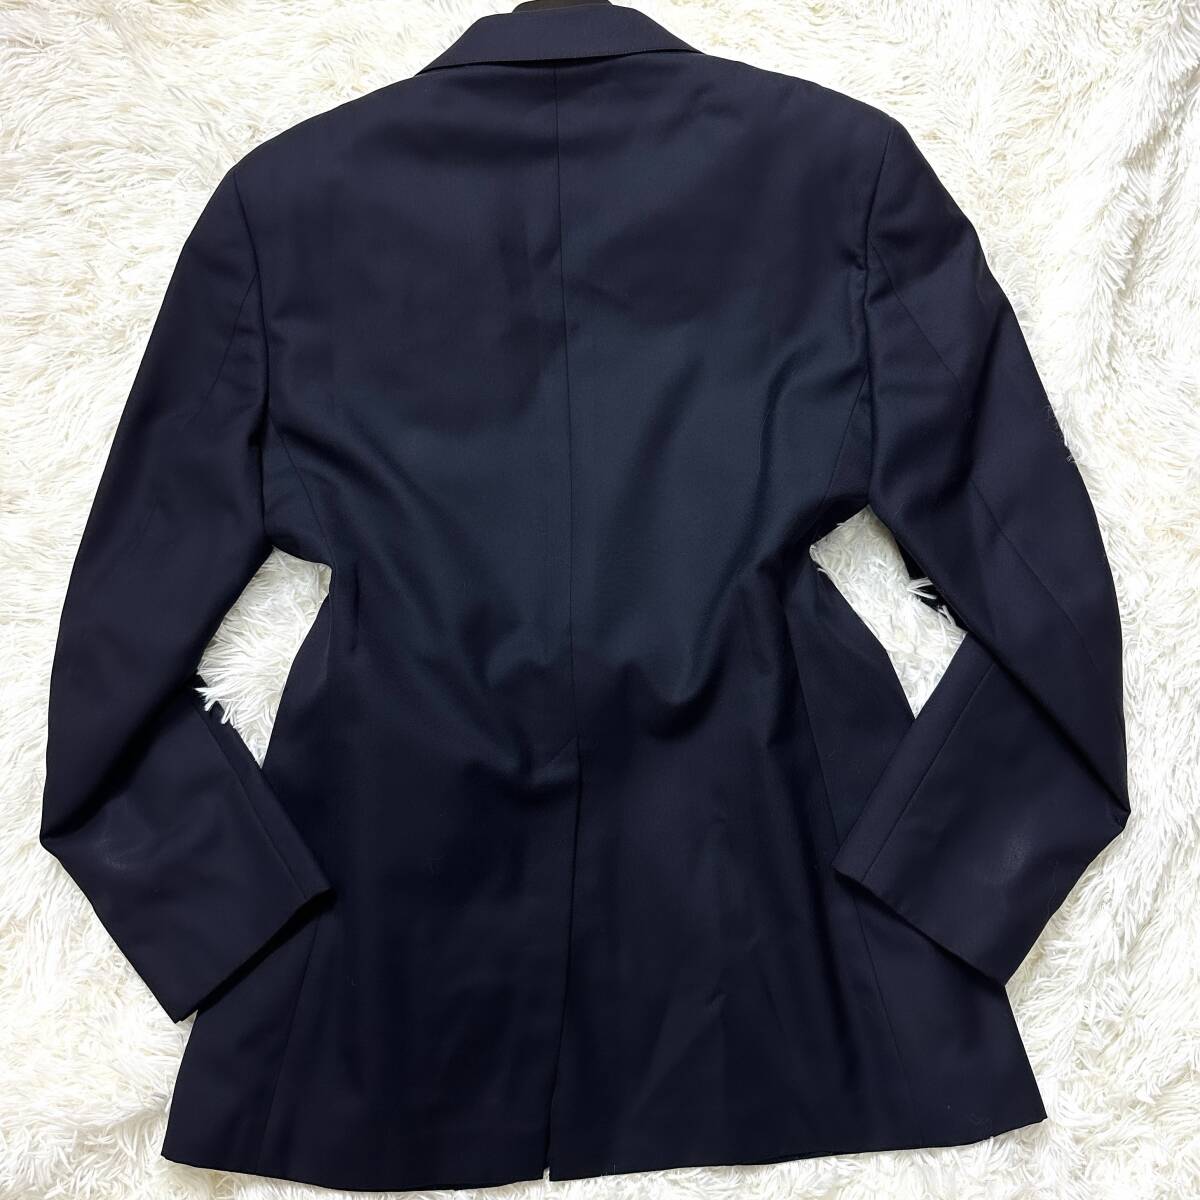  ultimate beautiful goods rare XL.LL~L!BROOKS BROTHERS setup suit 2 piece black navy blue black navy total reverse side spring autumn oriented YA72B large size Brooks Brothers 